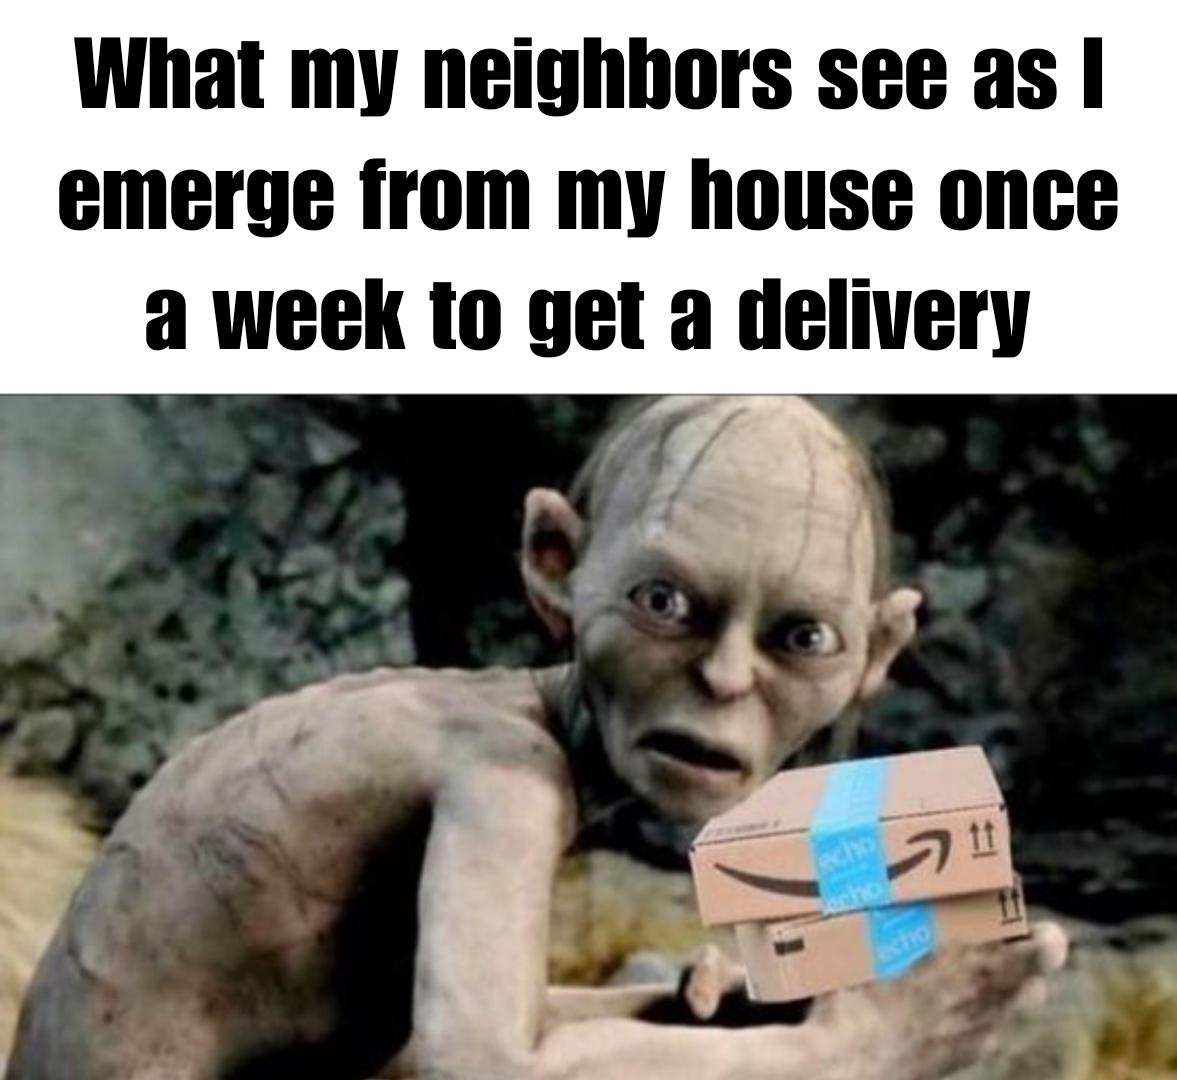 Funny and memes - photo caption - What my neighbors see as I emerge from my house once a week to get a delivery 5 tt echo